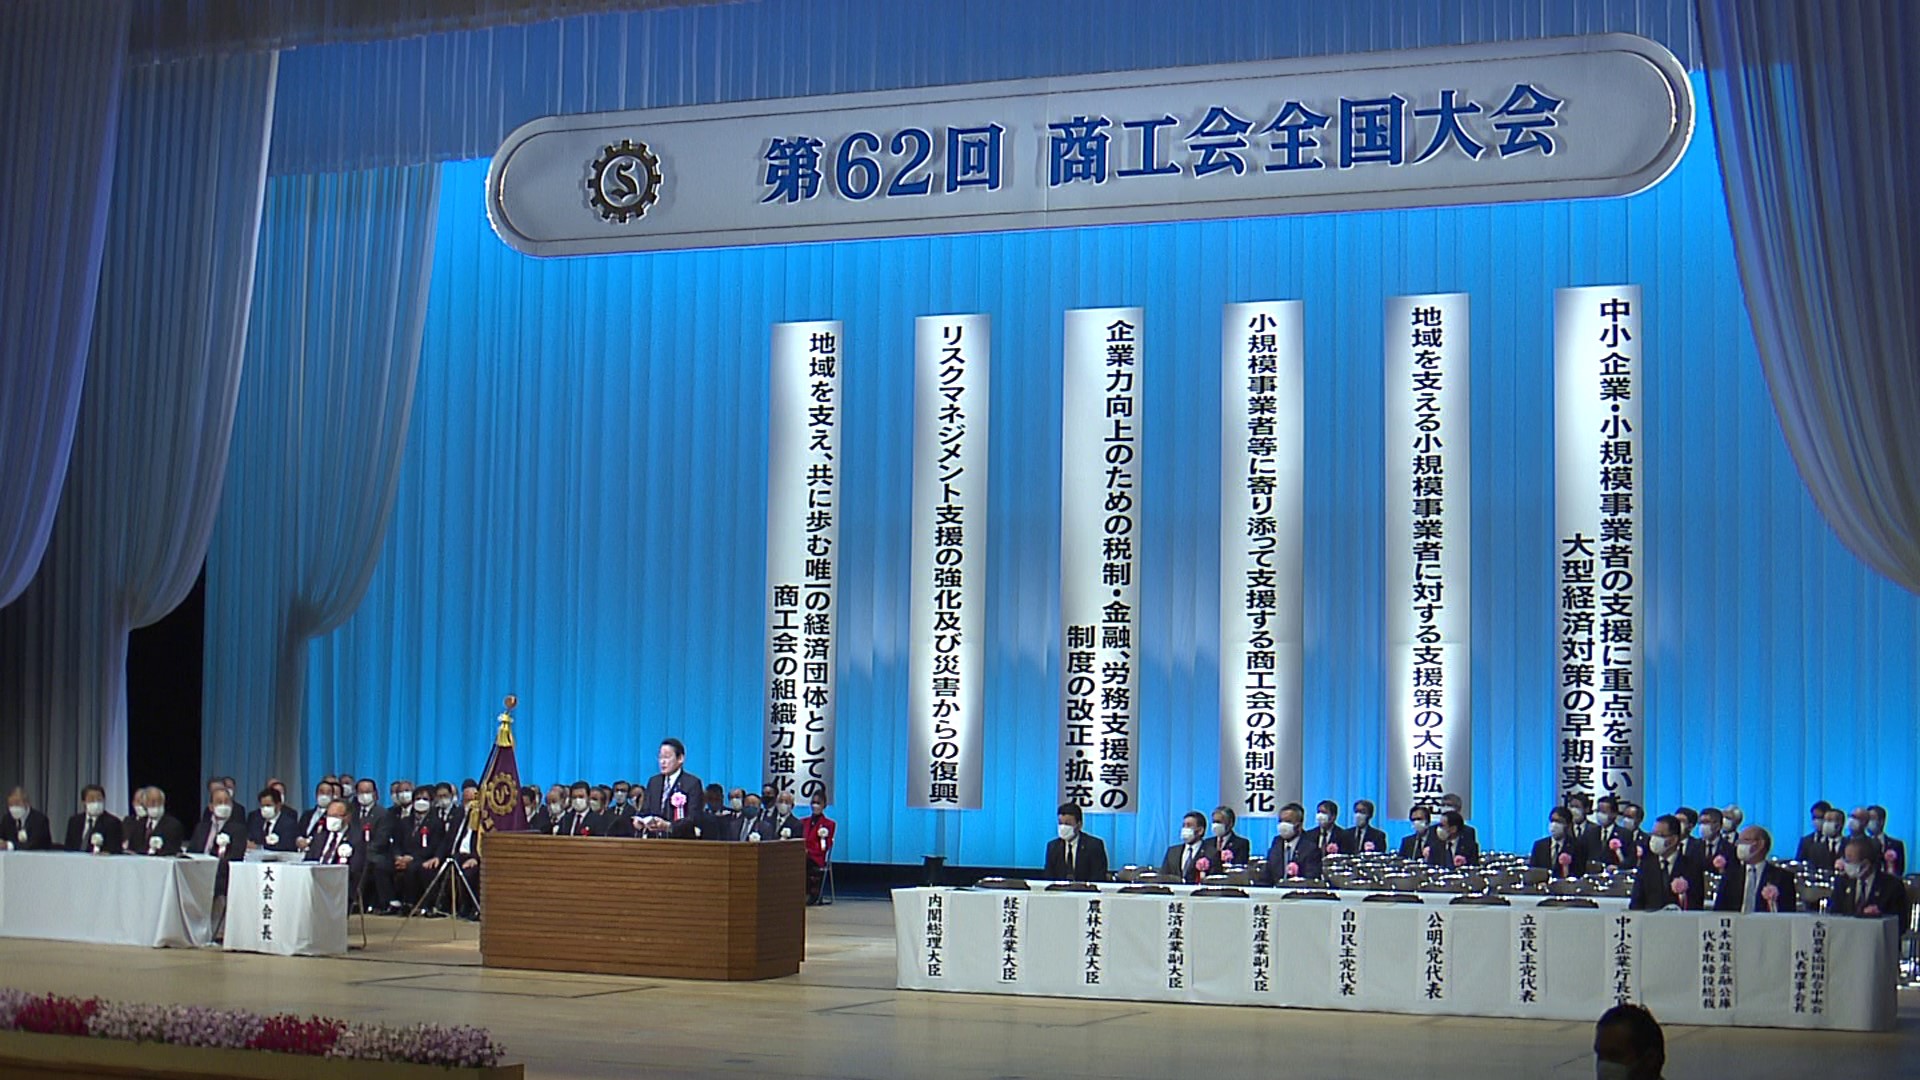 Photograph of the Prime Minister delivering an address (2)